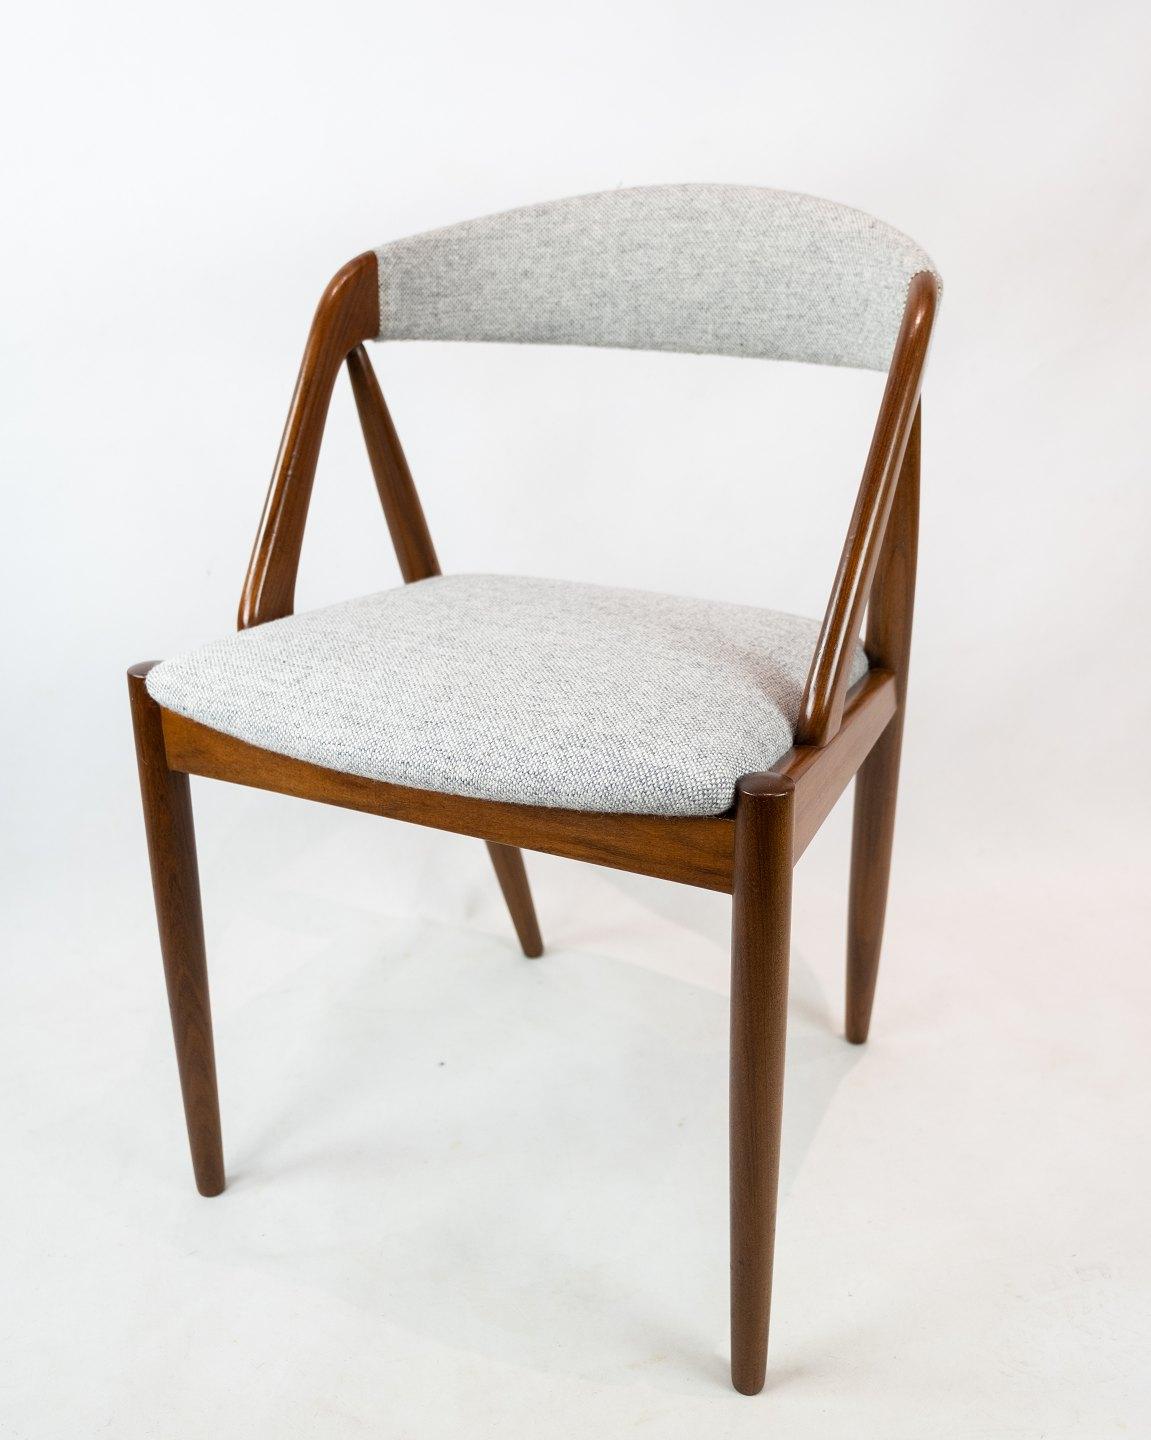 Wool Set of Six Dining Room Chairs, Model 31, Designed by Kai Kristiansen